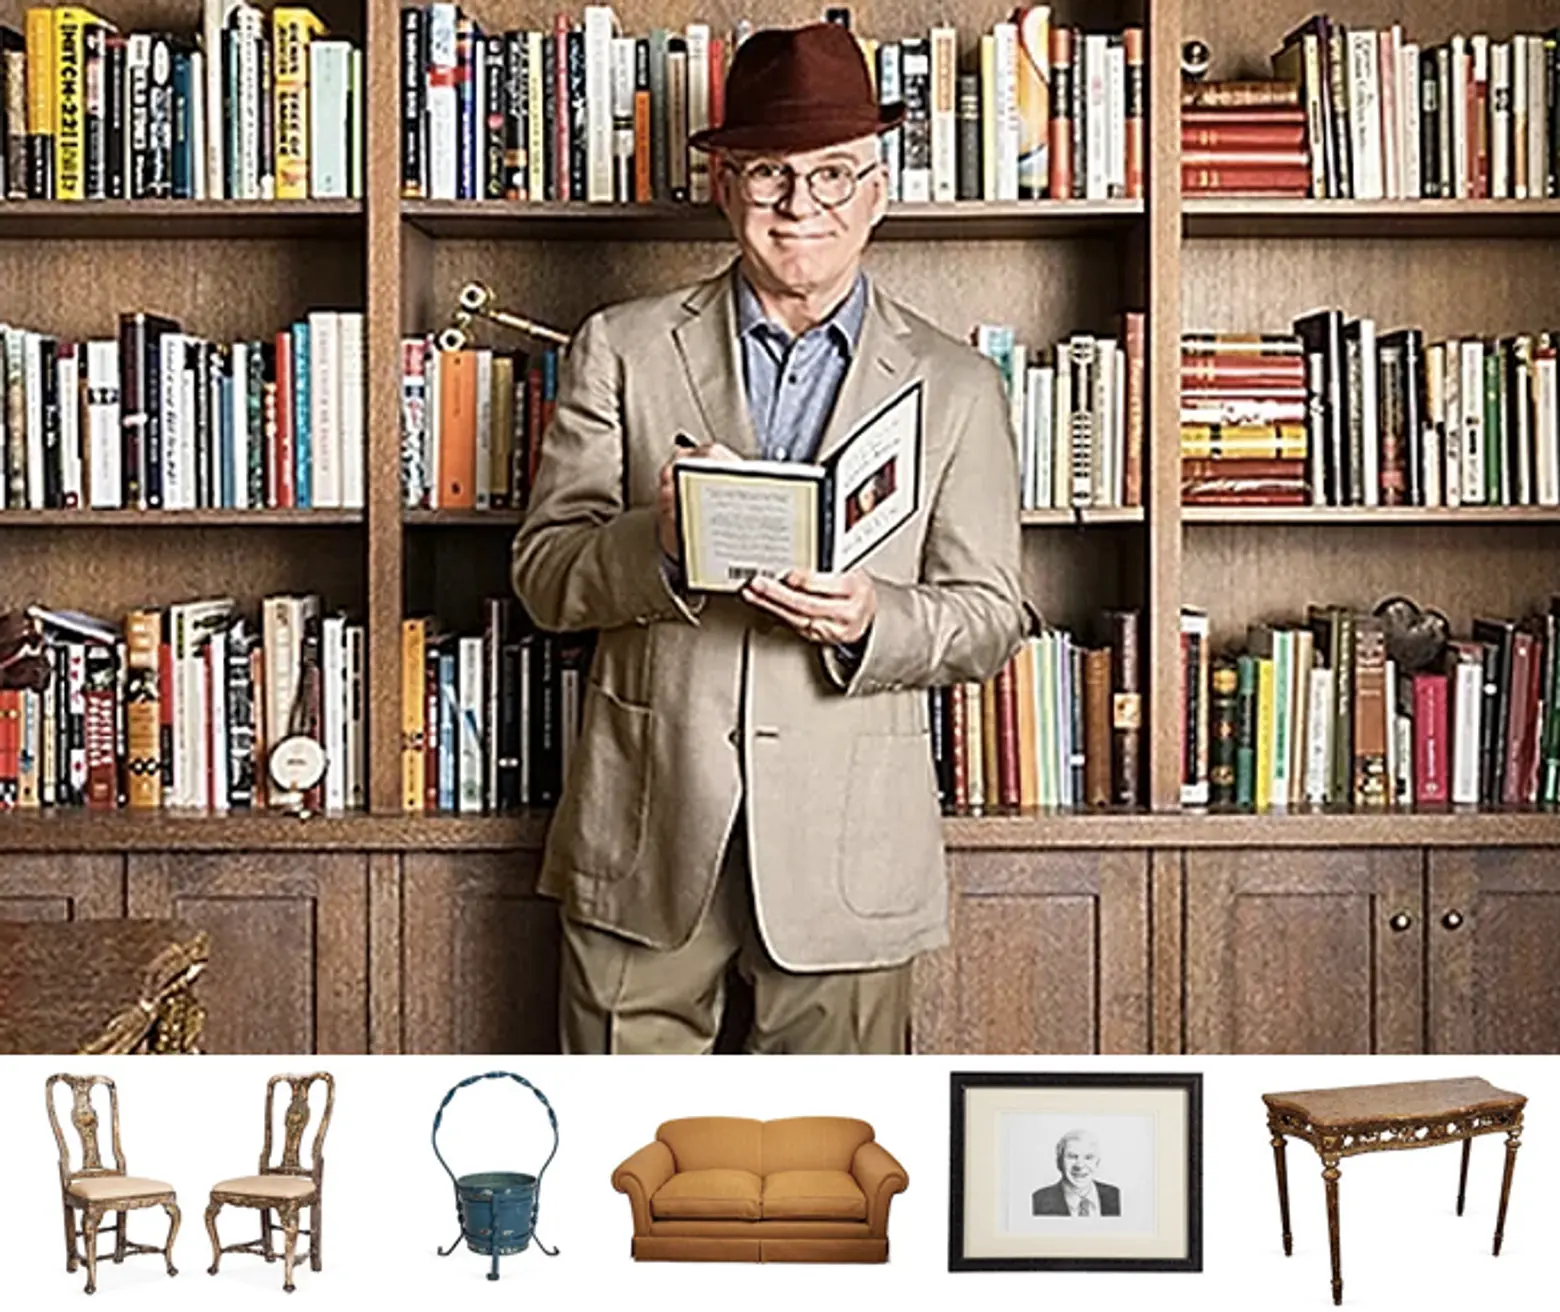 Buy Actor Steve Martin’s Cast-Off Furniture, Items Going for $249–$70,000